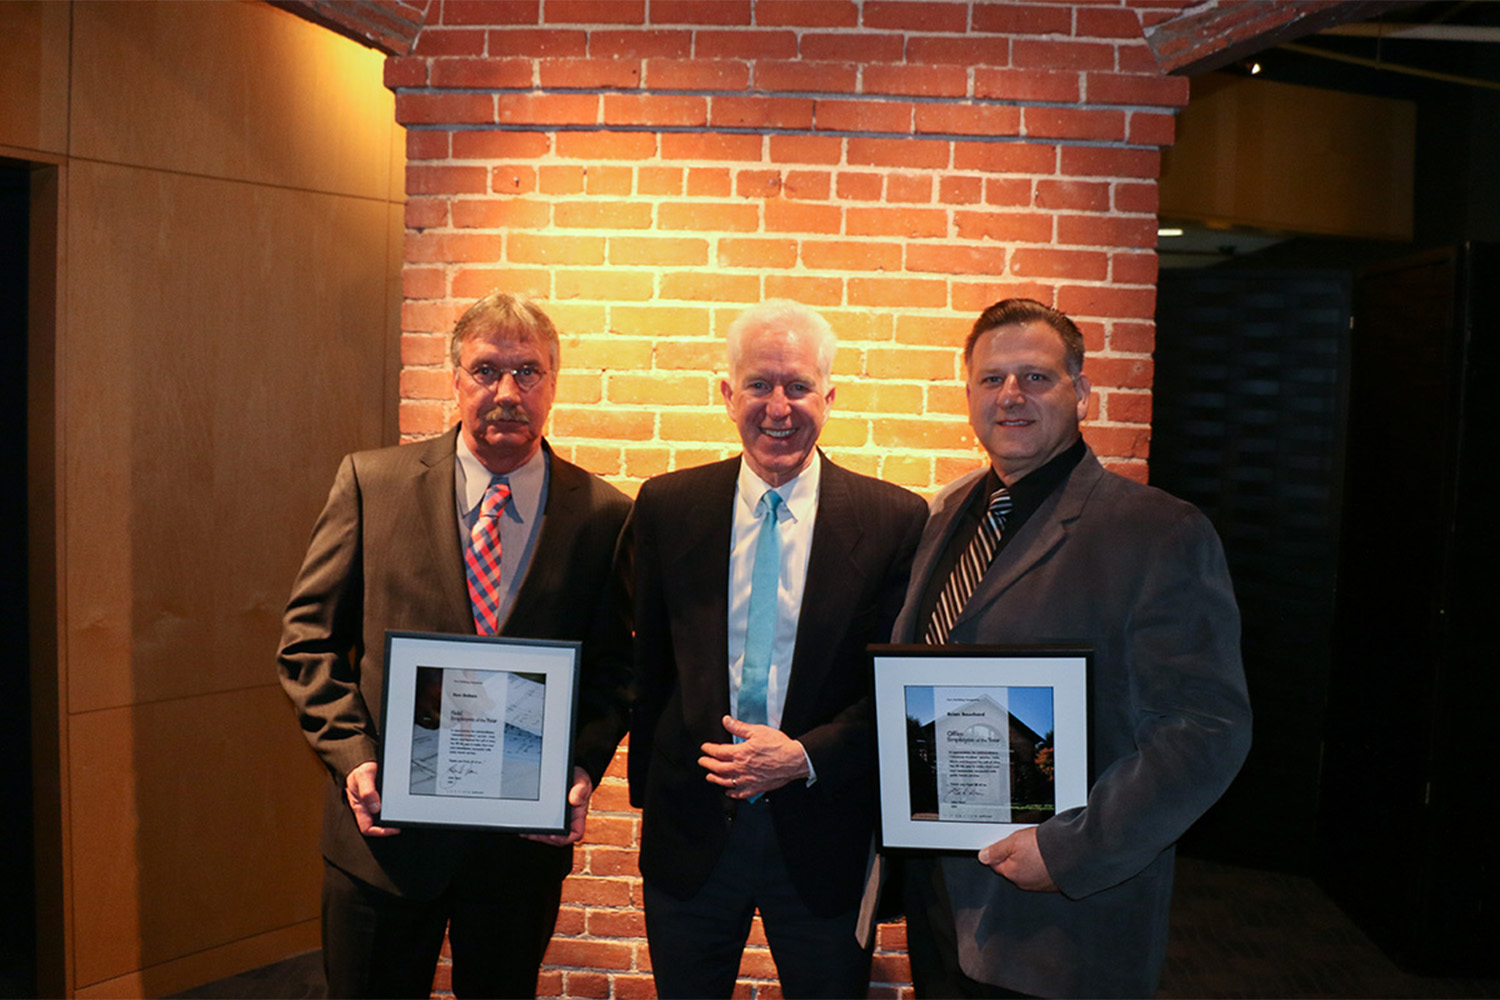 Employees of the Year, Ken + Brian, with John, receiving their rewards 